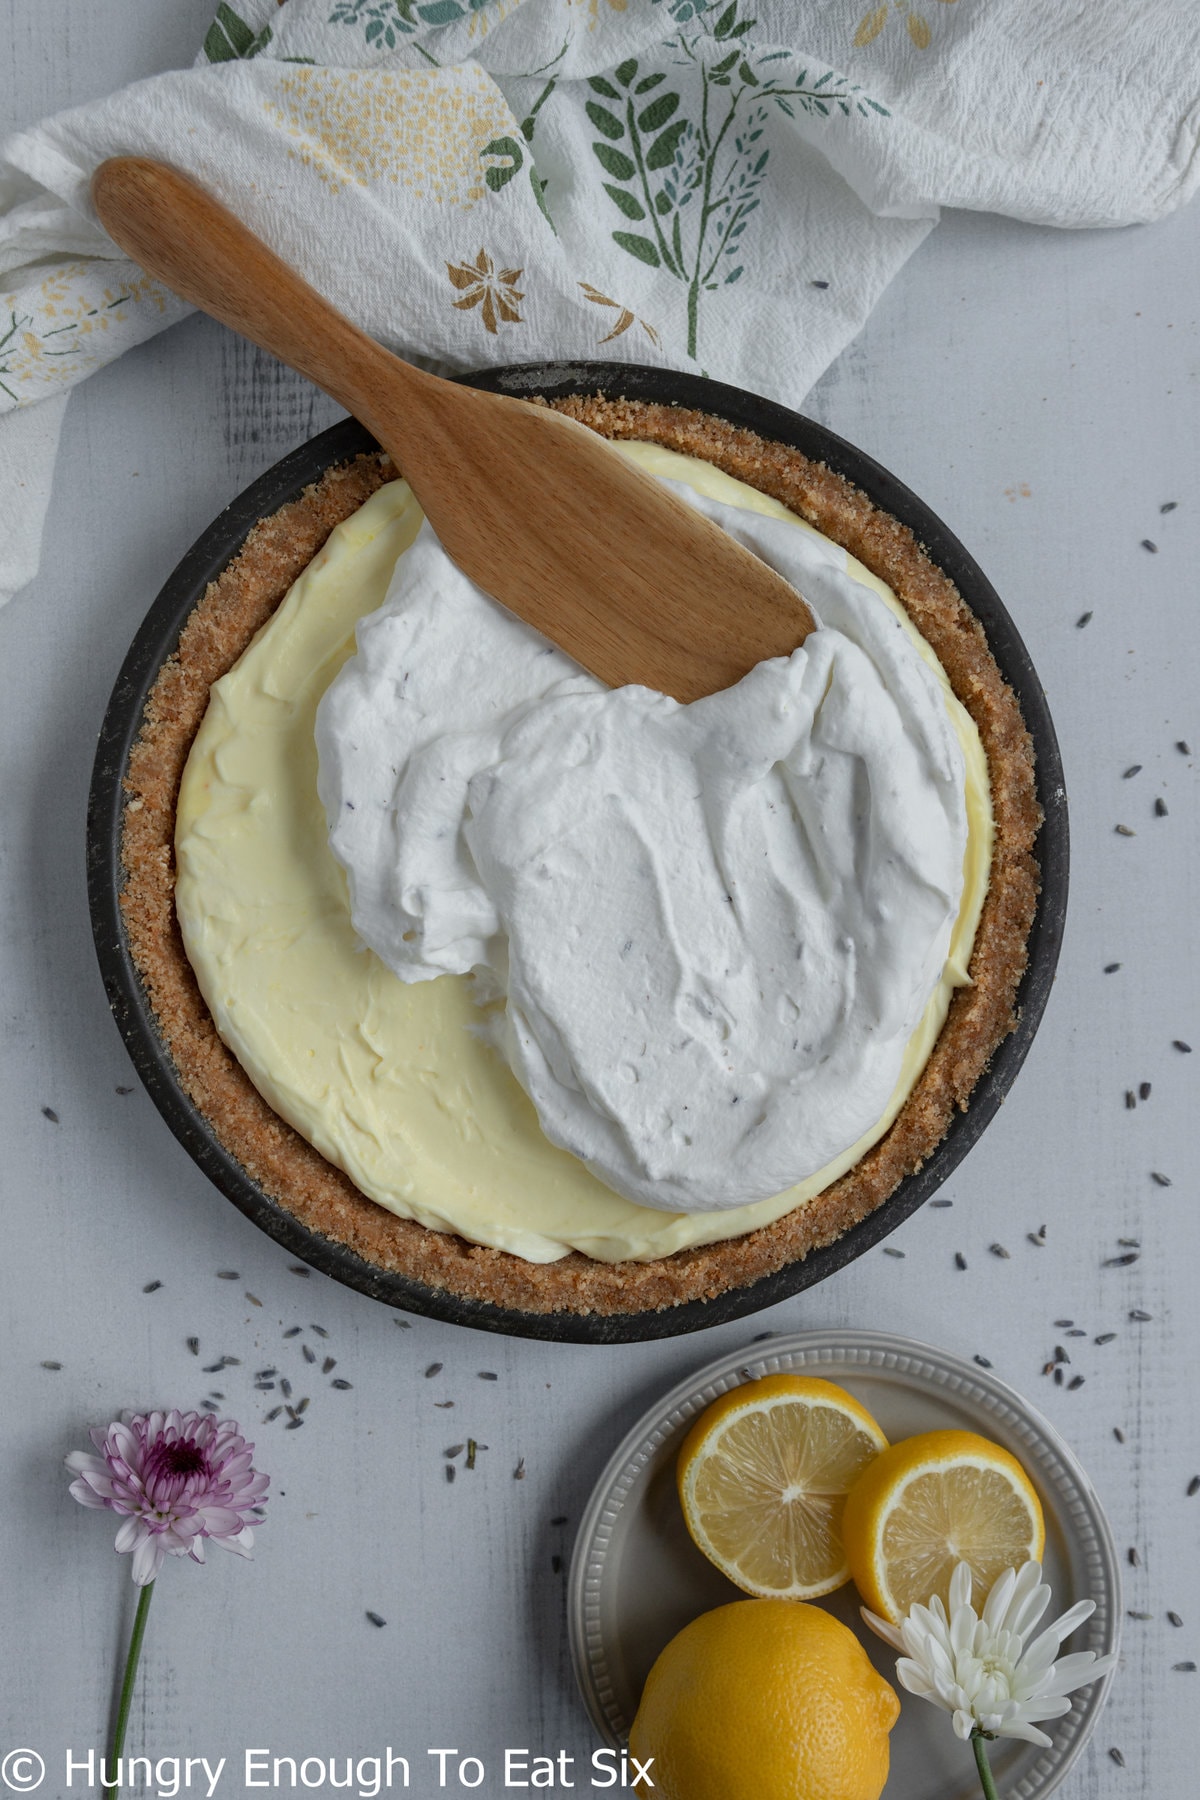 Graham crust pie with lemon pudding and whipped cream on top.